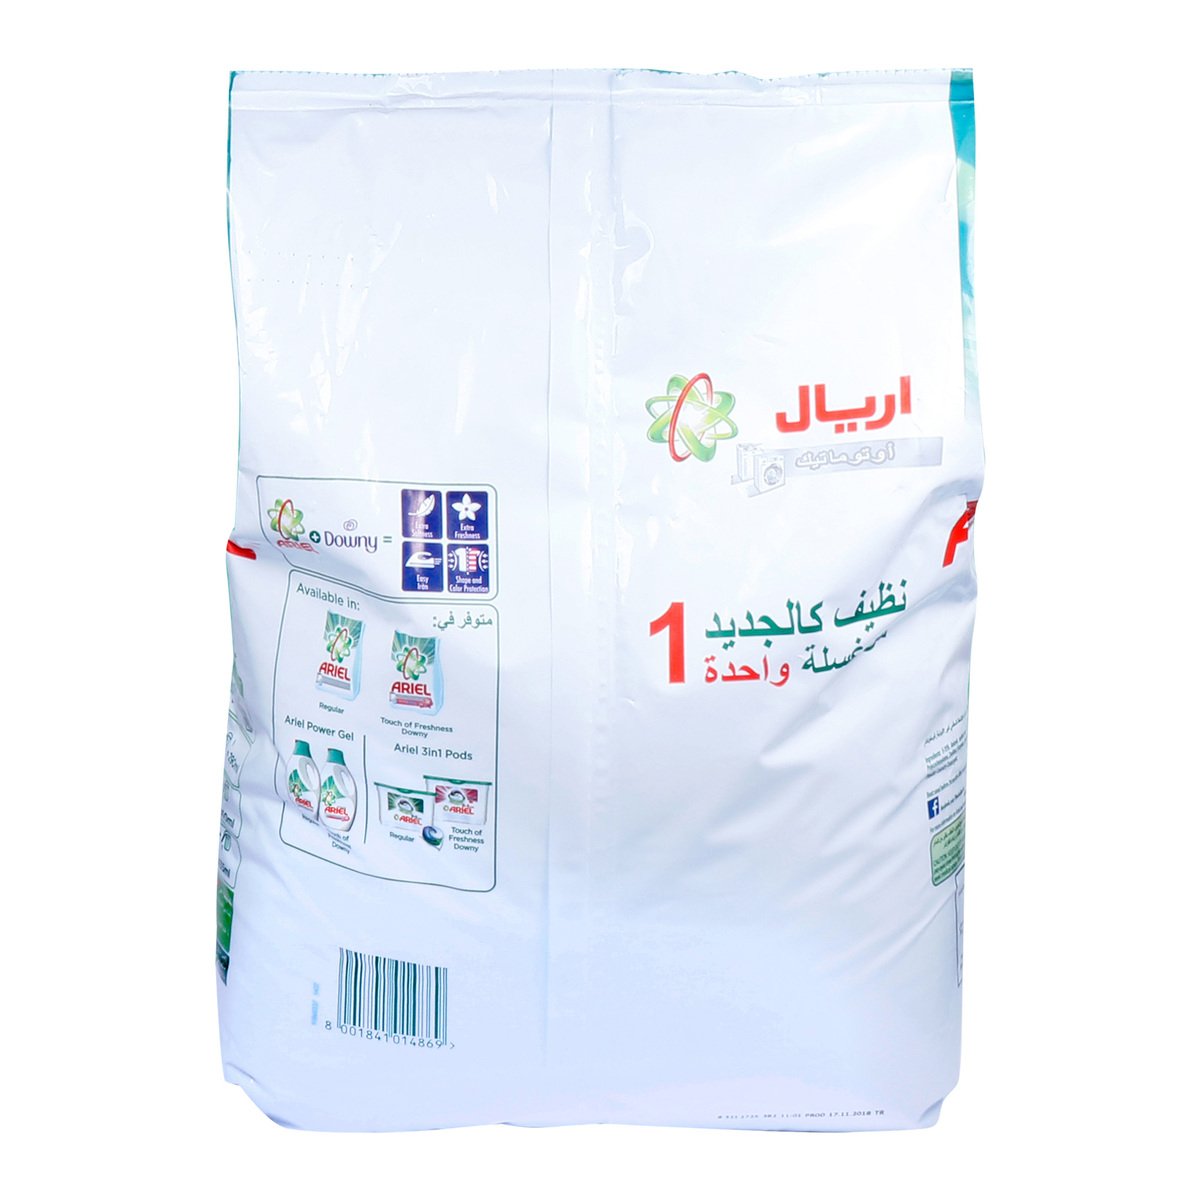 Ariel Automatic Washing Powder Front Load Concentrated 3kg